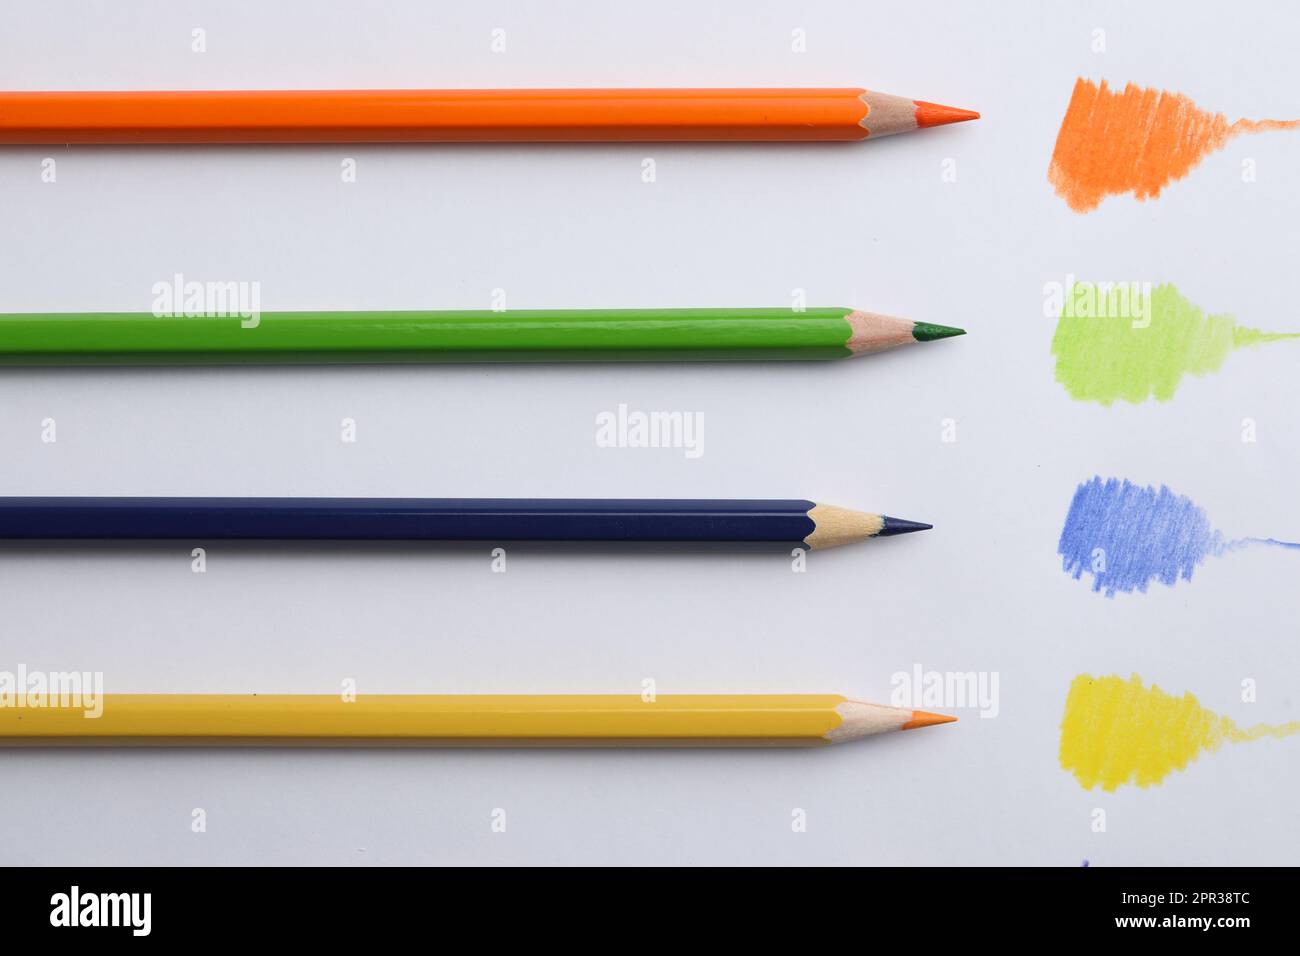 an orange, green, blue, and yellow pencil next to color swatches on white paper